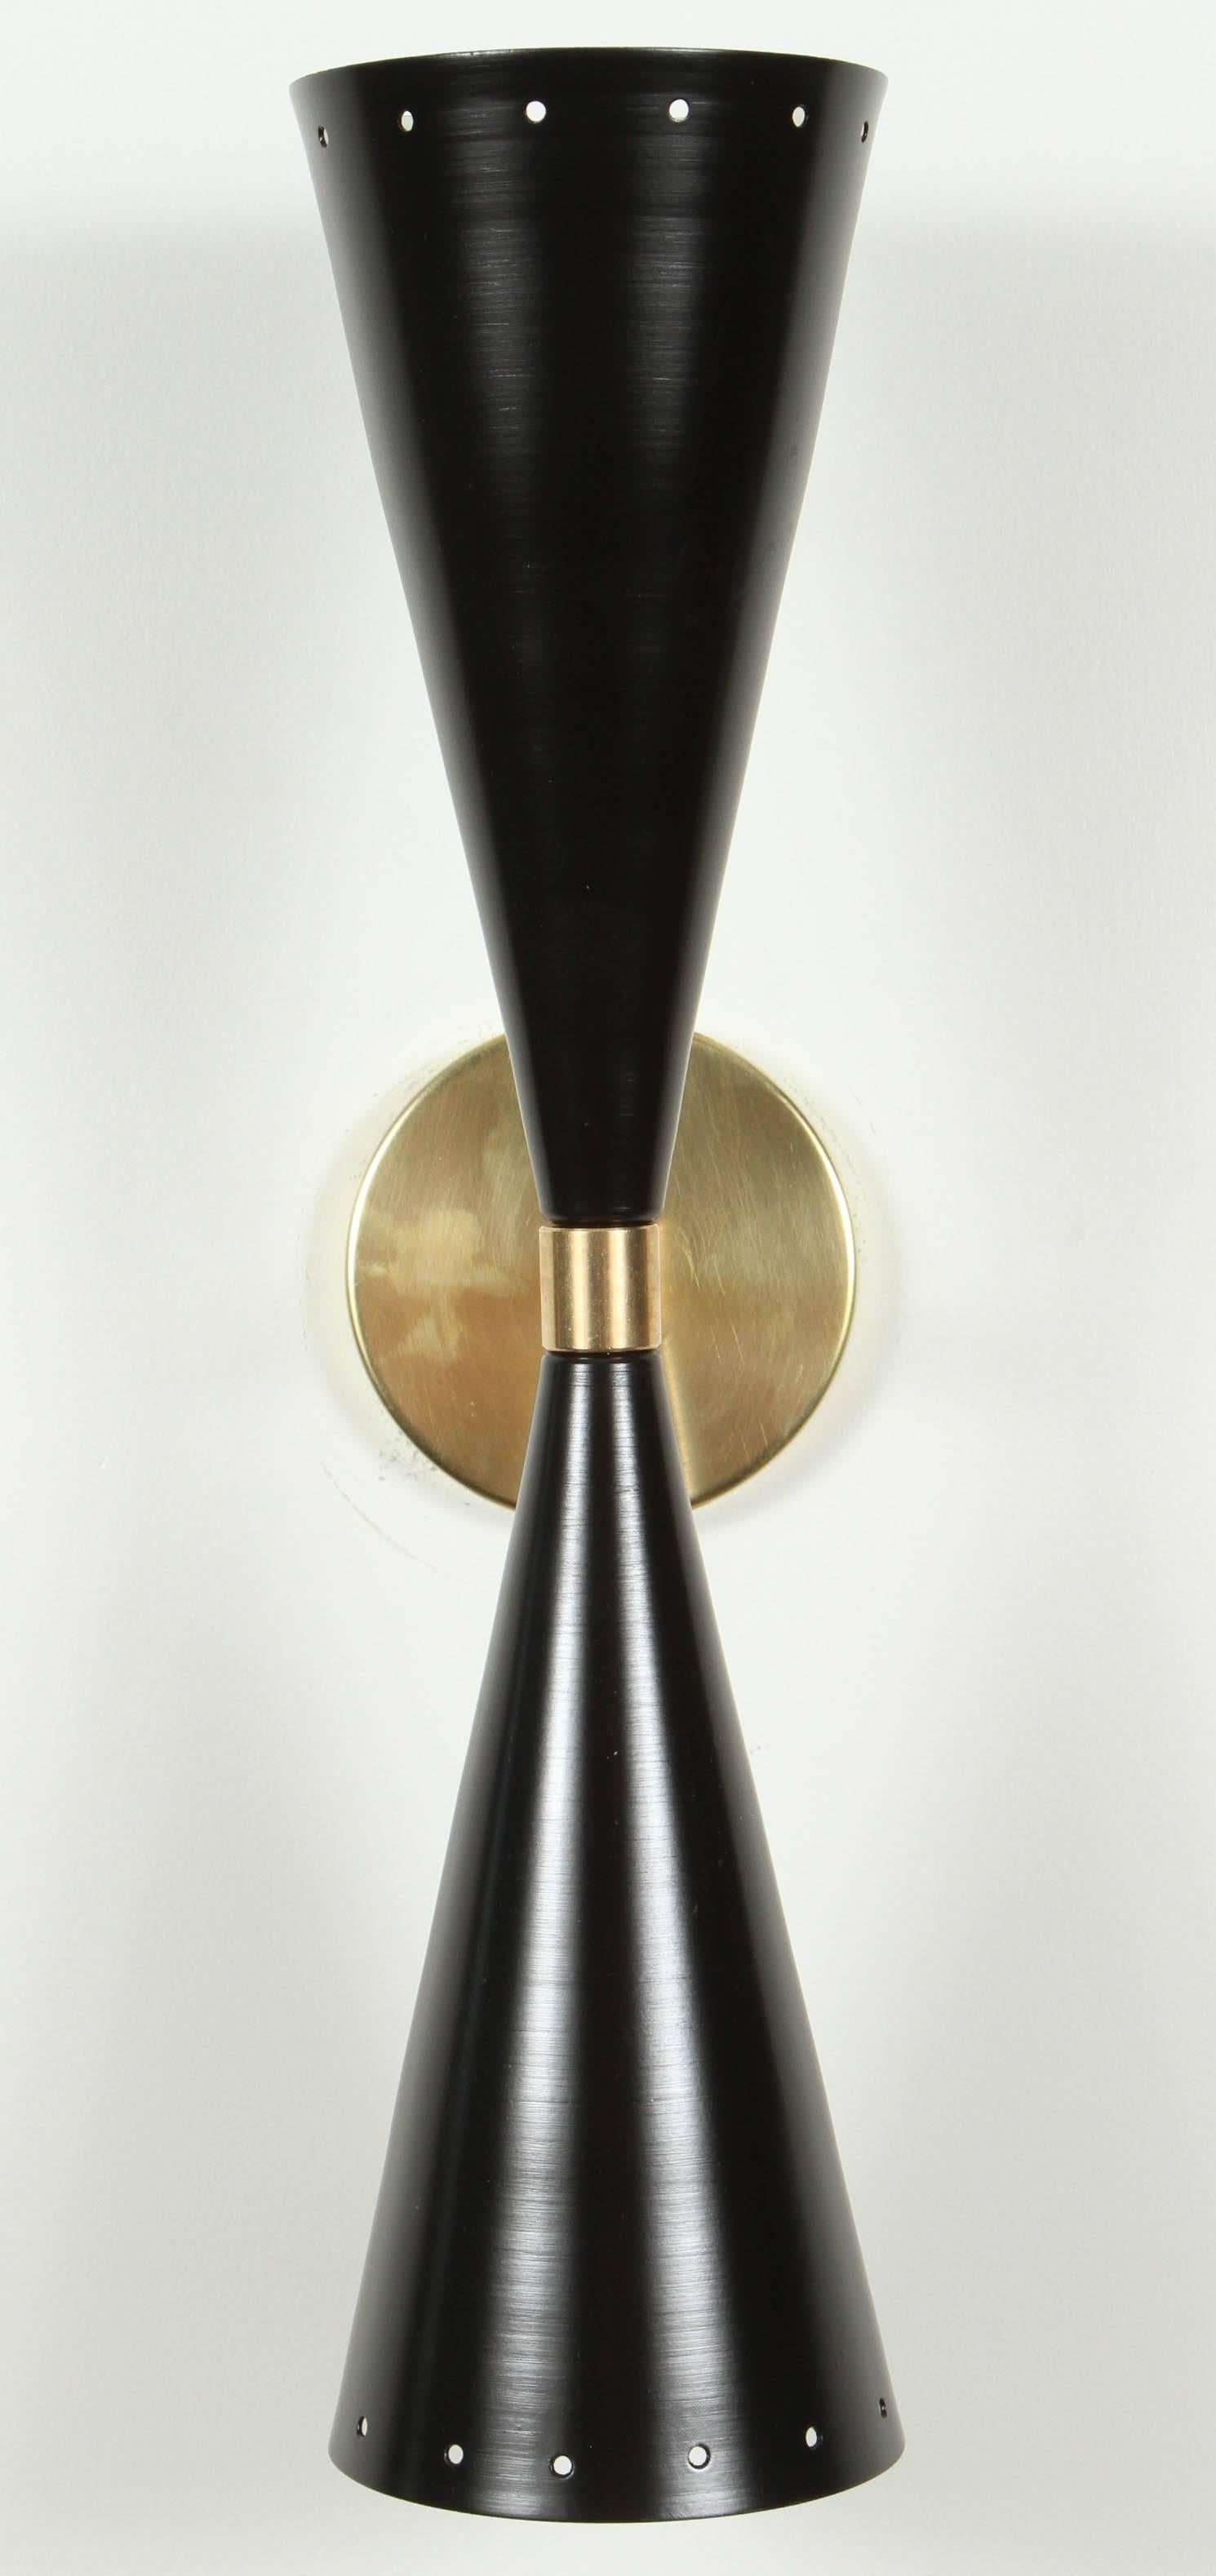 American Double Cone Sconce by Lawson-Fenning